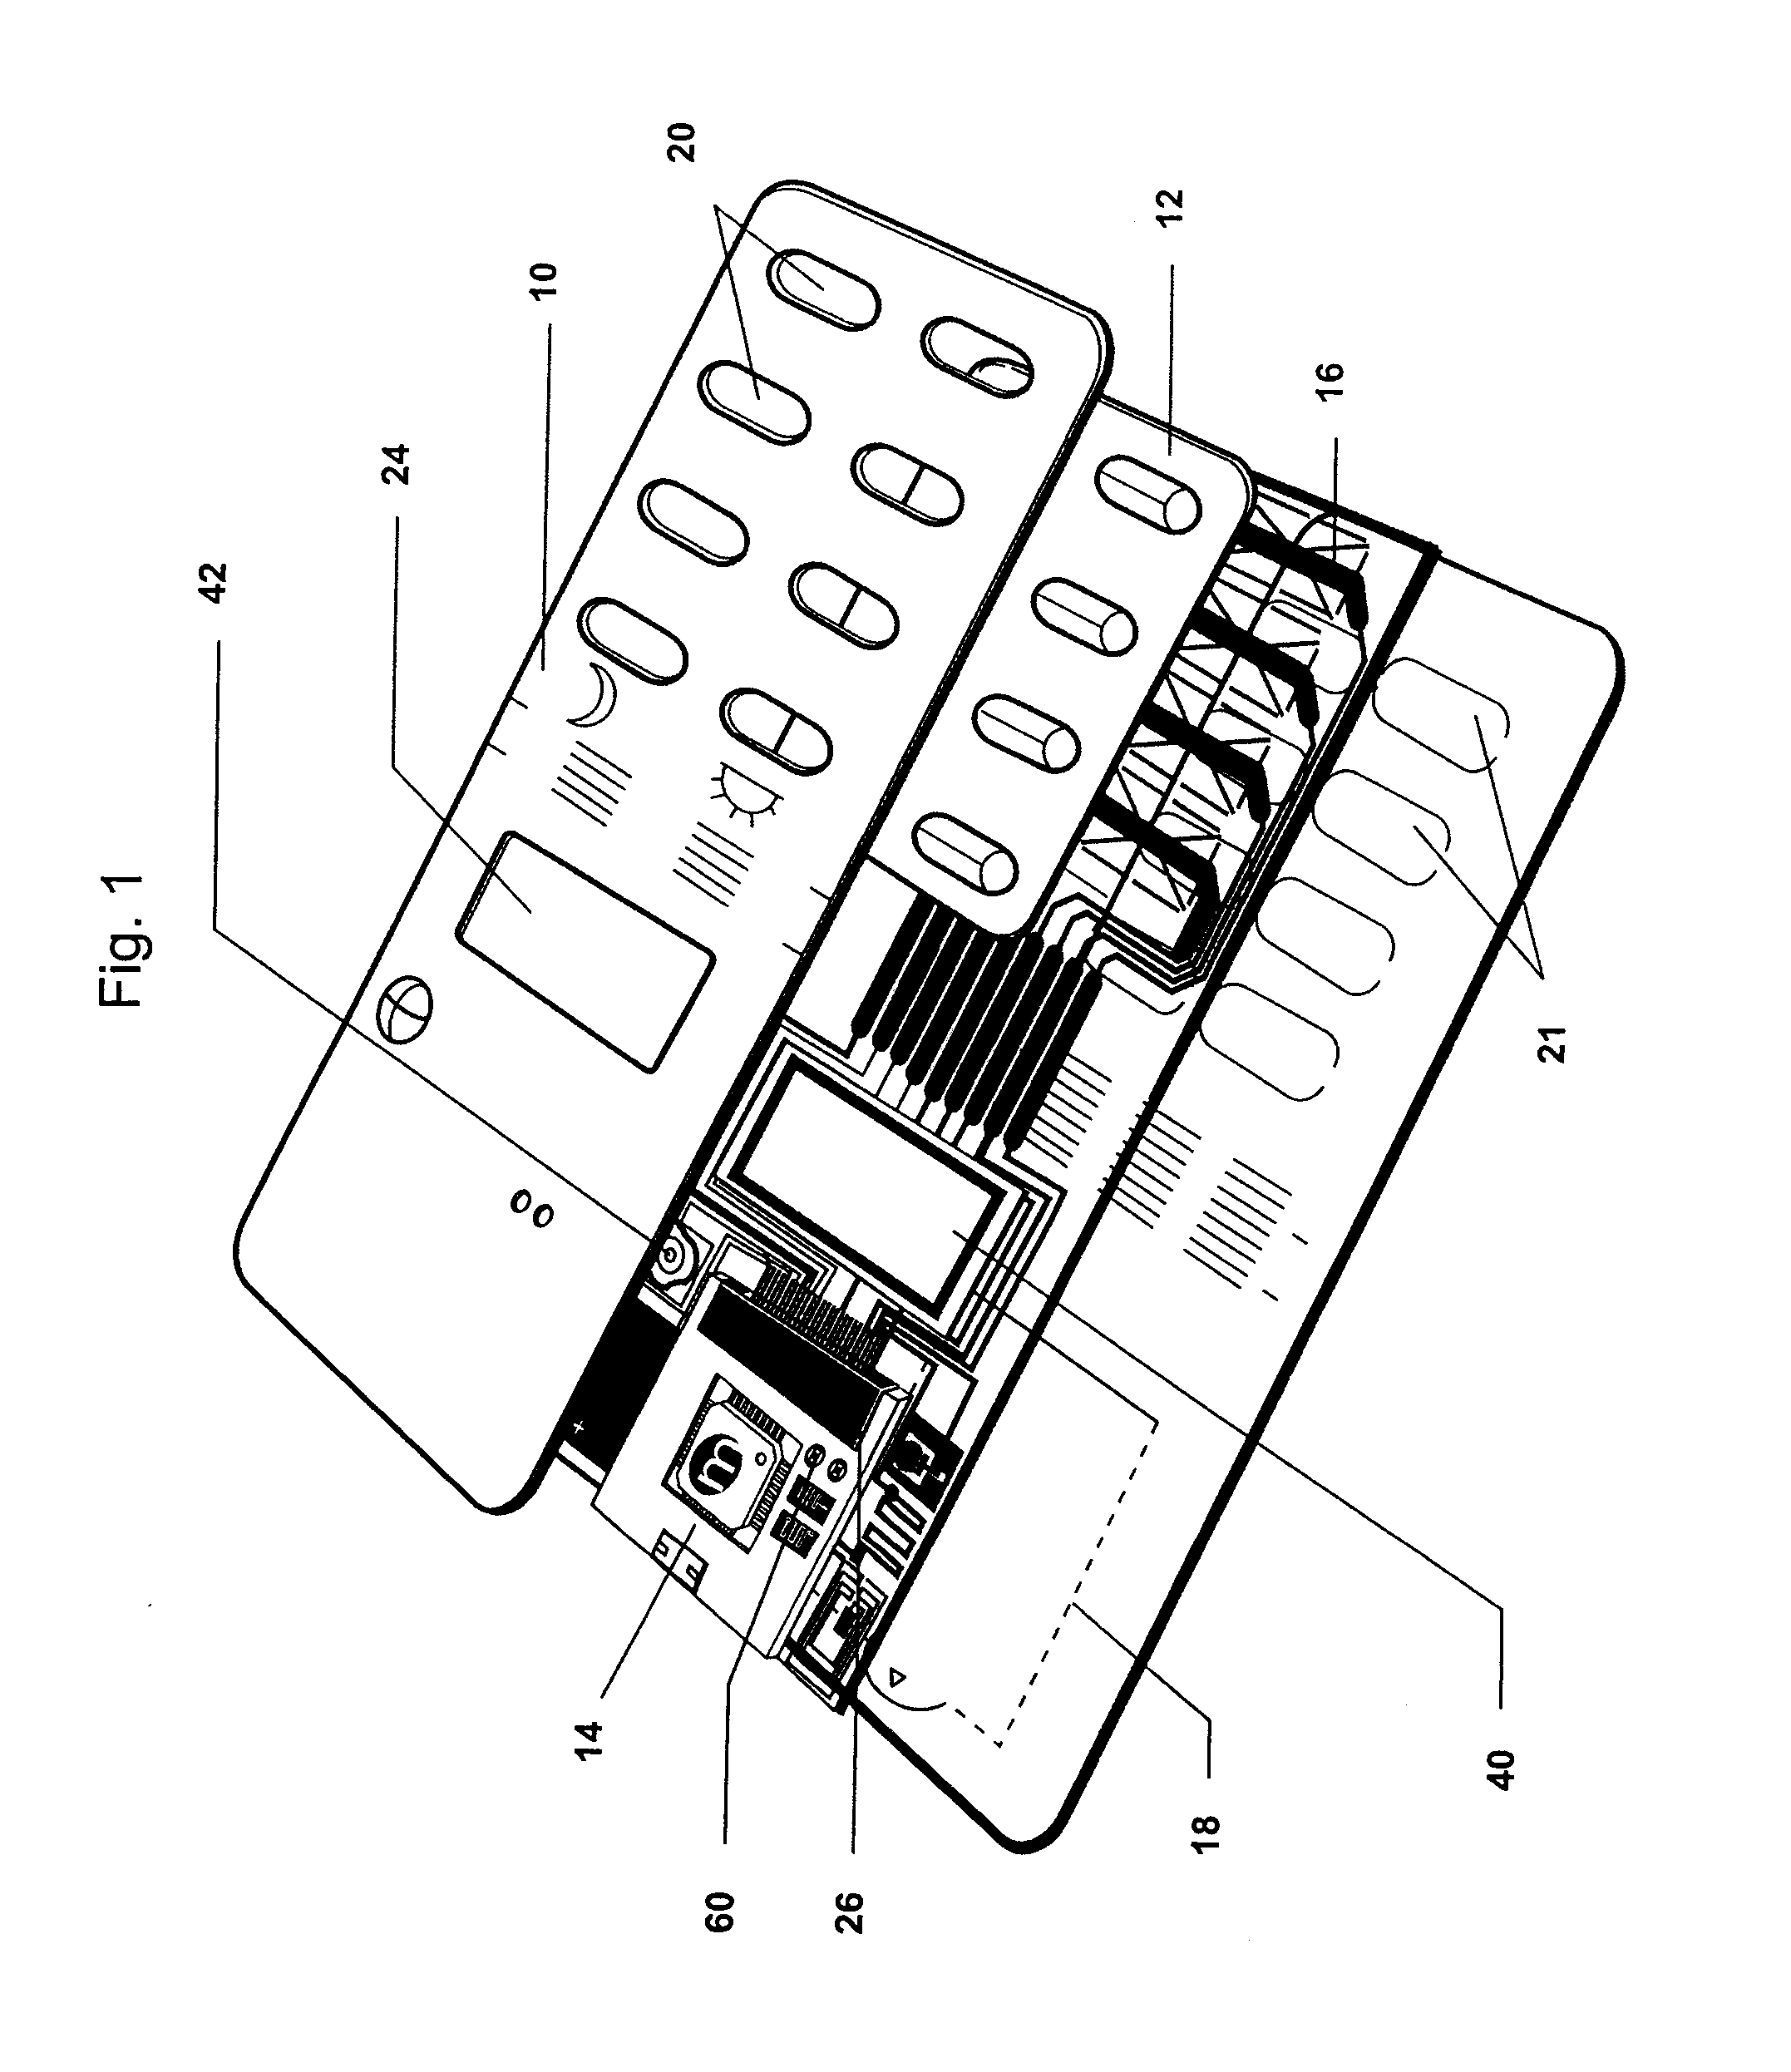 Disposable content use monitoring package with a removable re-usable electronic circuit board